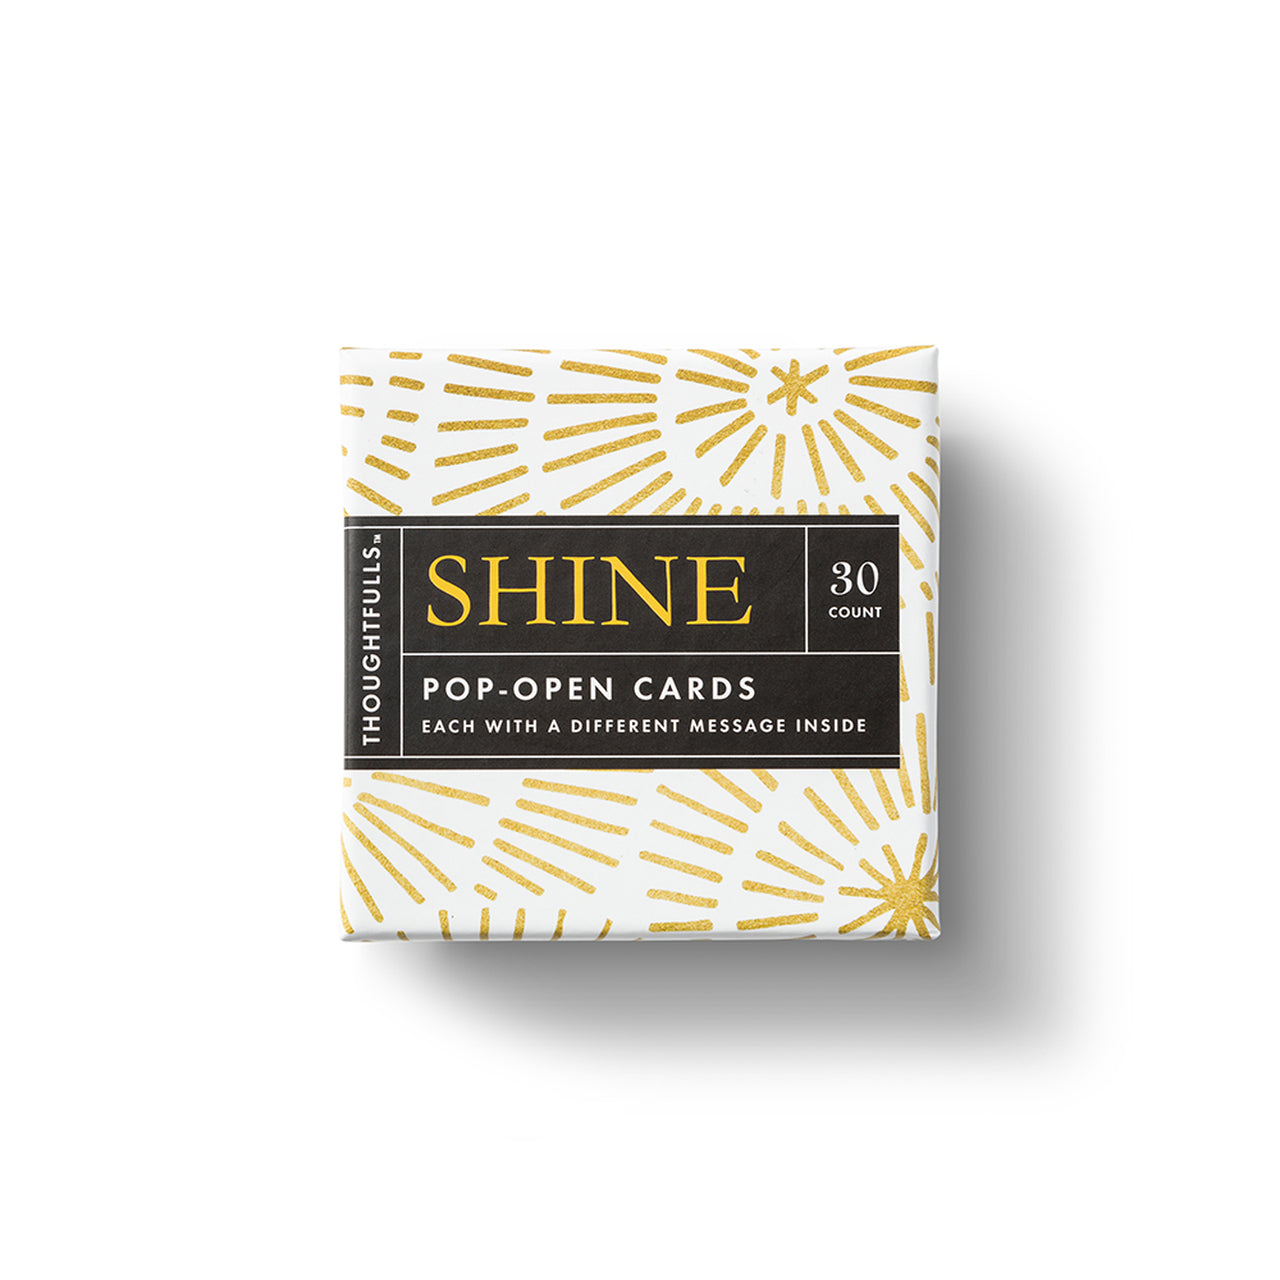 SHINE Pop-Open Thoughtful Cards